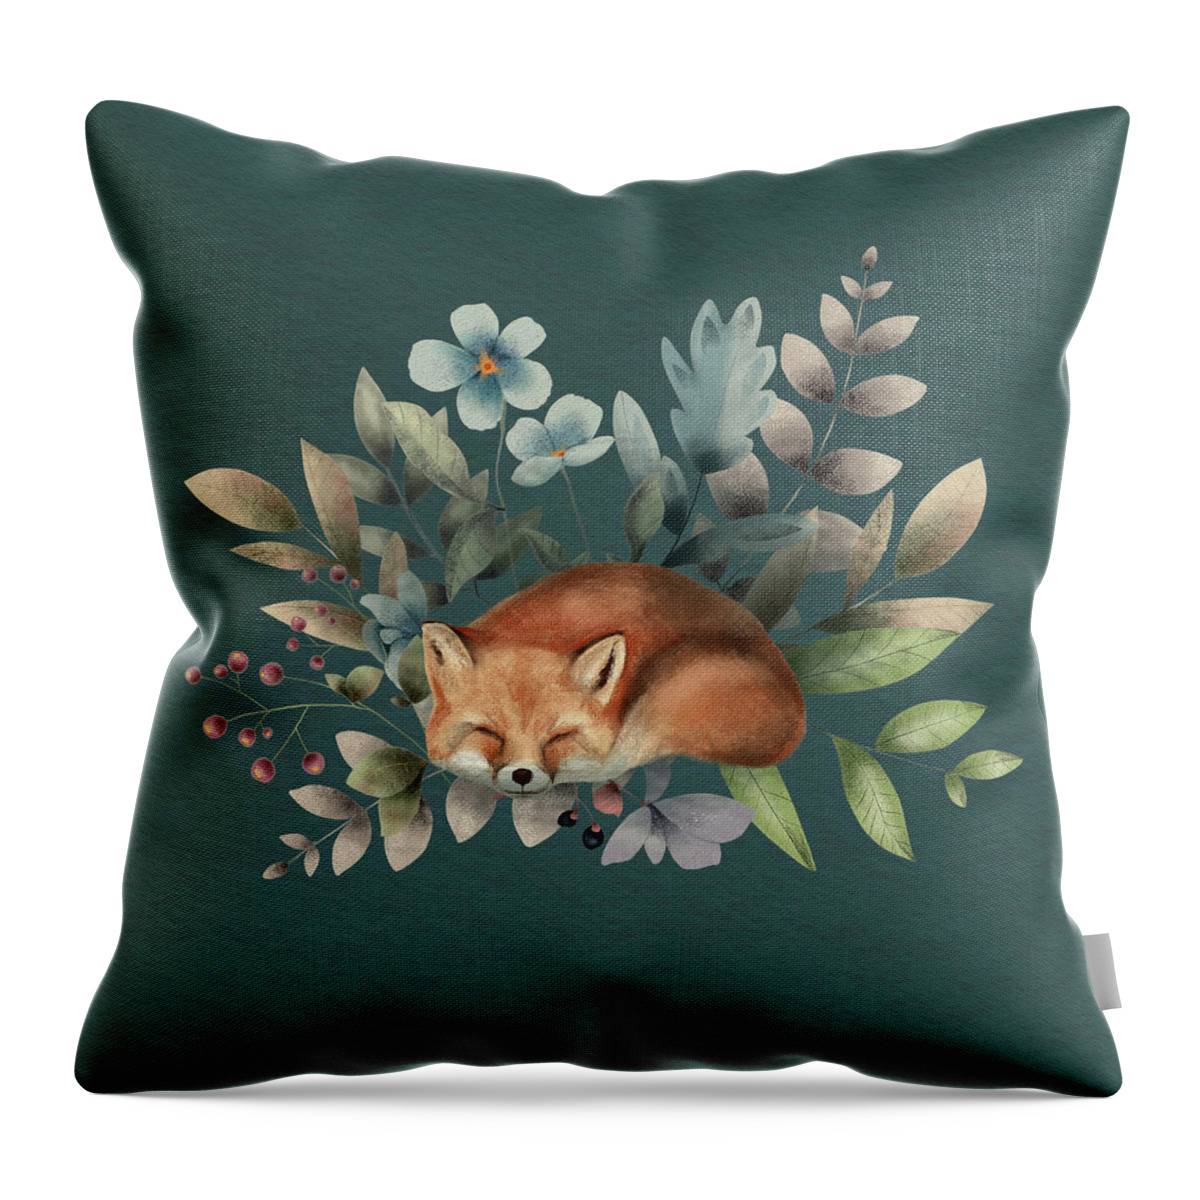 Fox Throw Pillow featuring the painting Fox With Flowers by Garden Of Delights